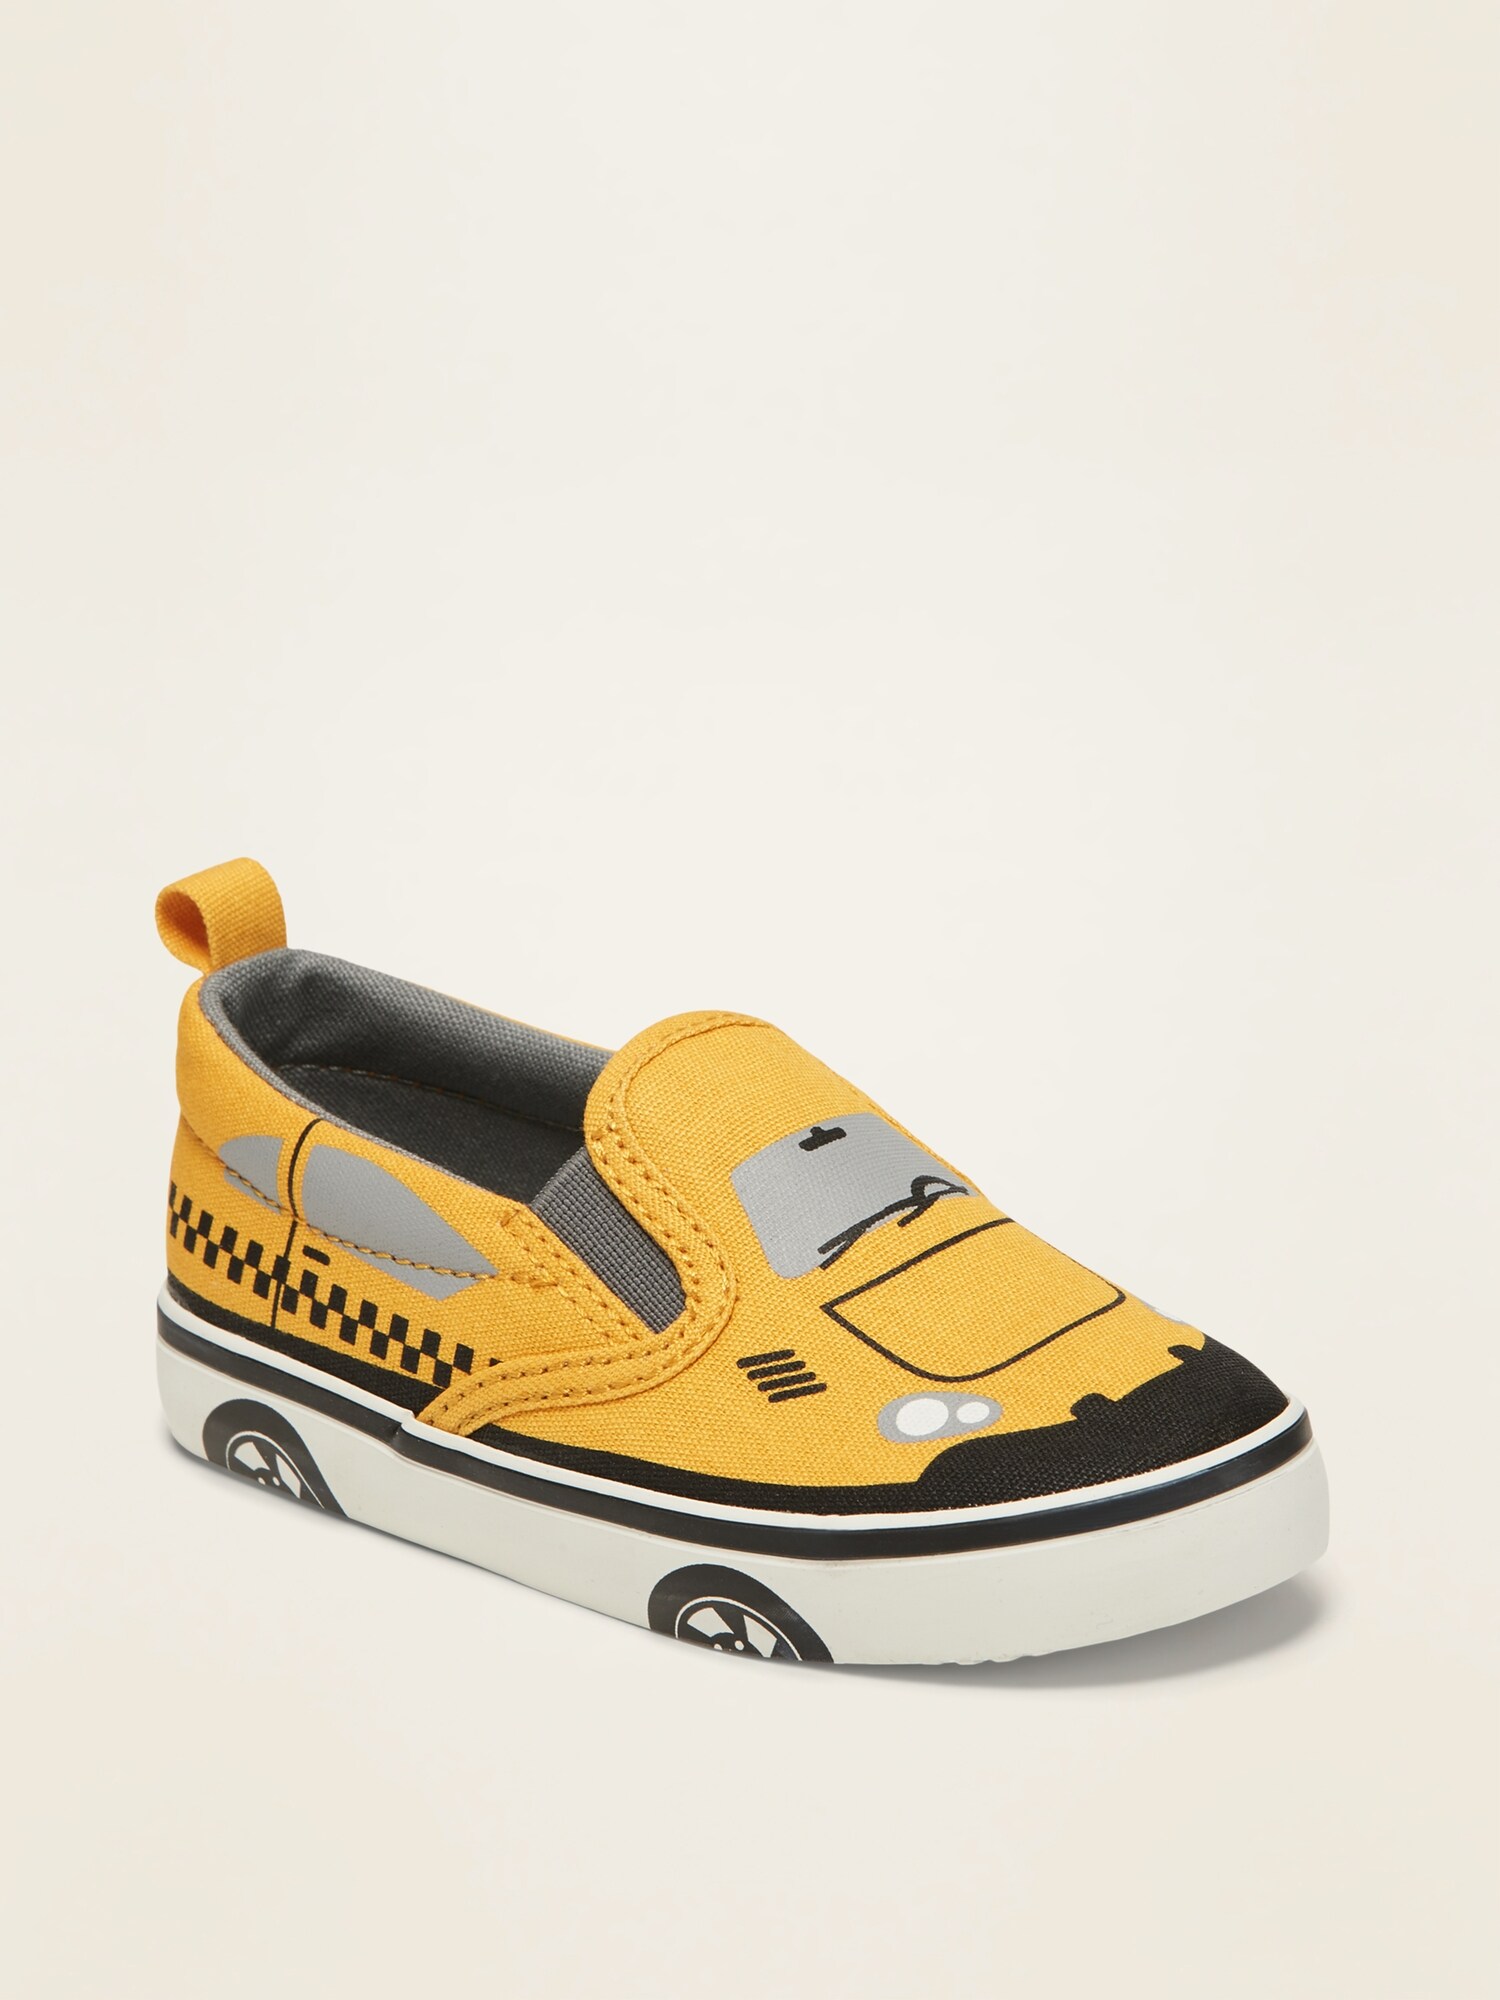 Car-Graphic Slip-On Sneakers for 